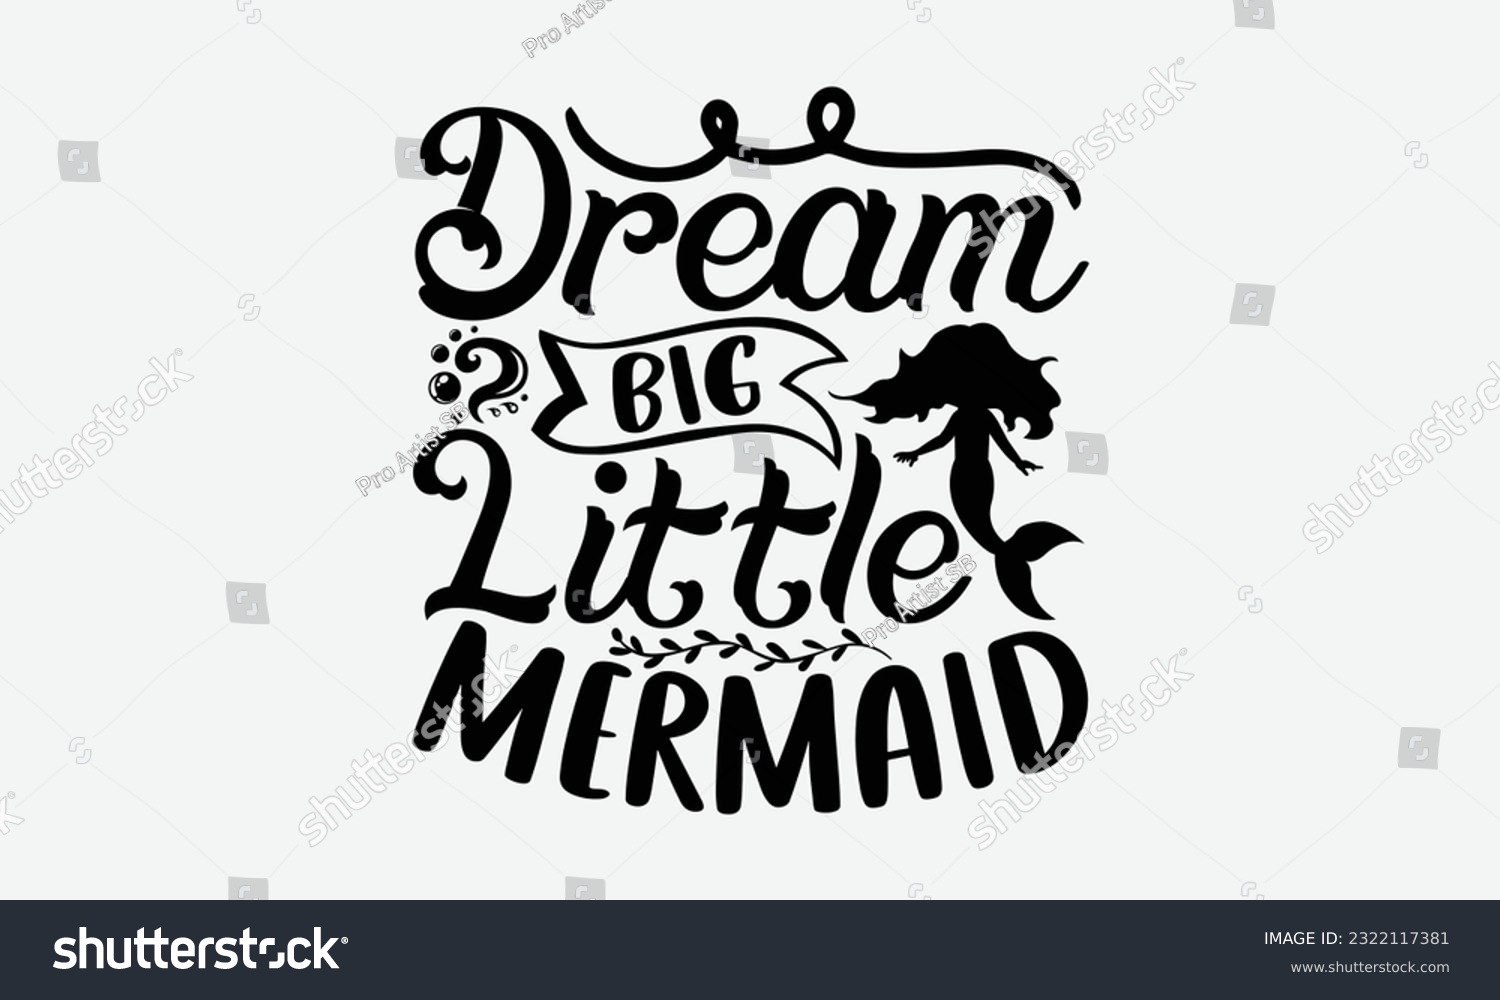 SVG of Dream Big Little Mermaid - Fishing SVG Design, Isolated On White Background, For Cutting Machine, Silhouette Cameo, Cricut. svg